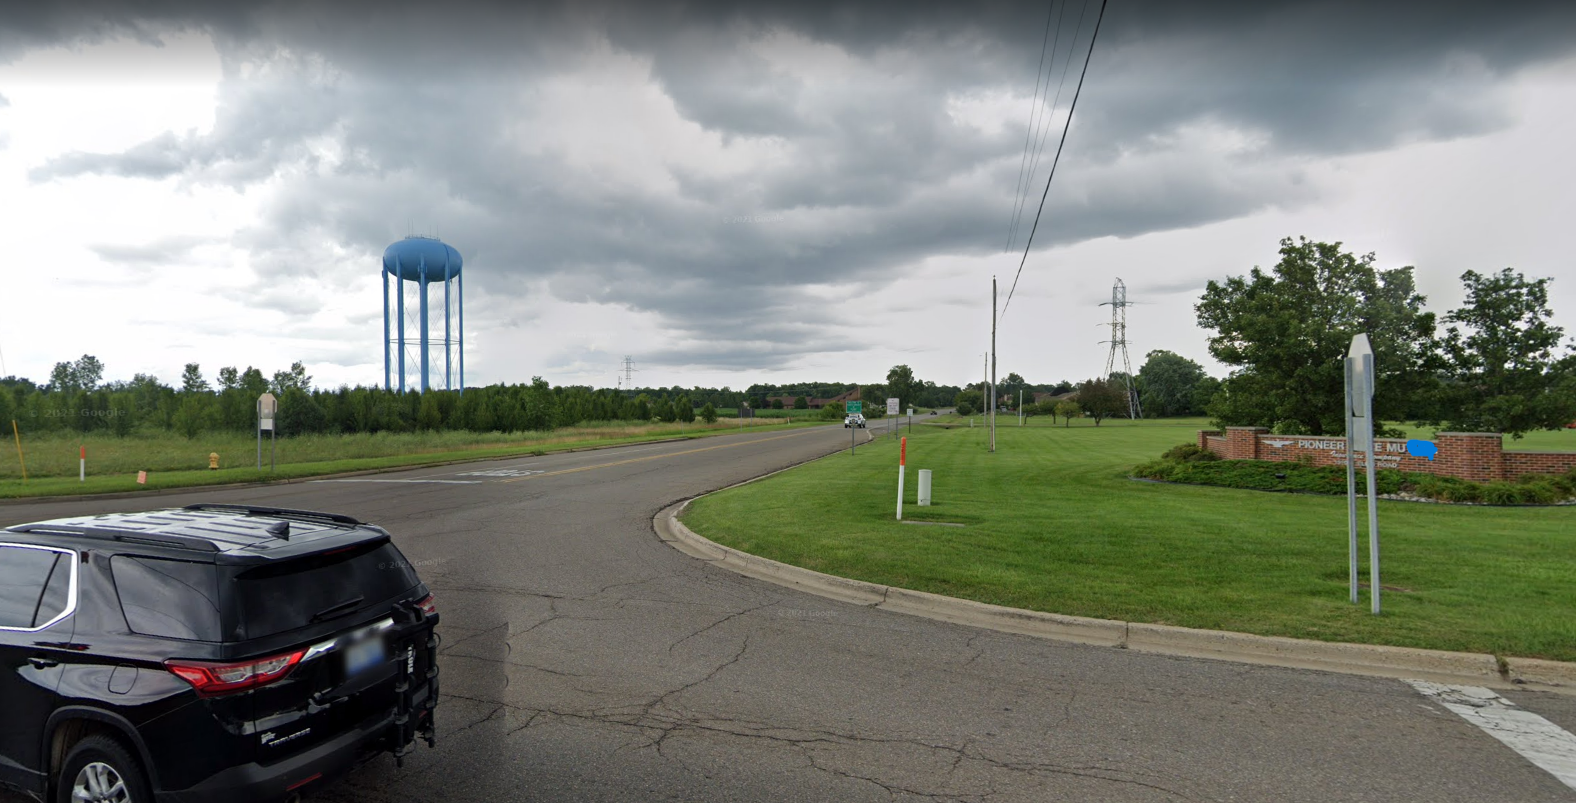 A screenshot of Google Street View, with a view of road, a water tower, and a sign of Pioneer [redacted]e mu[redacted].